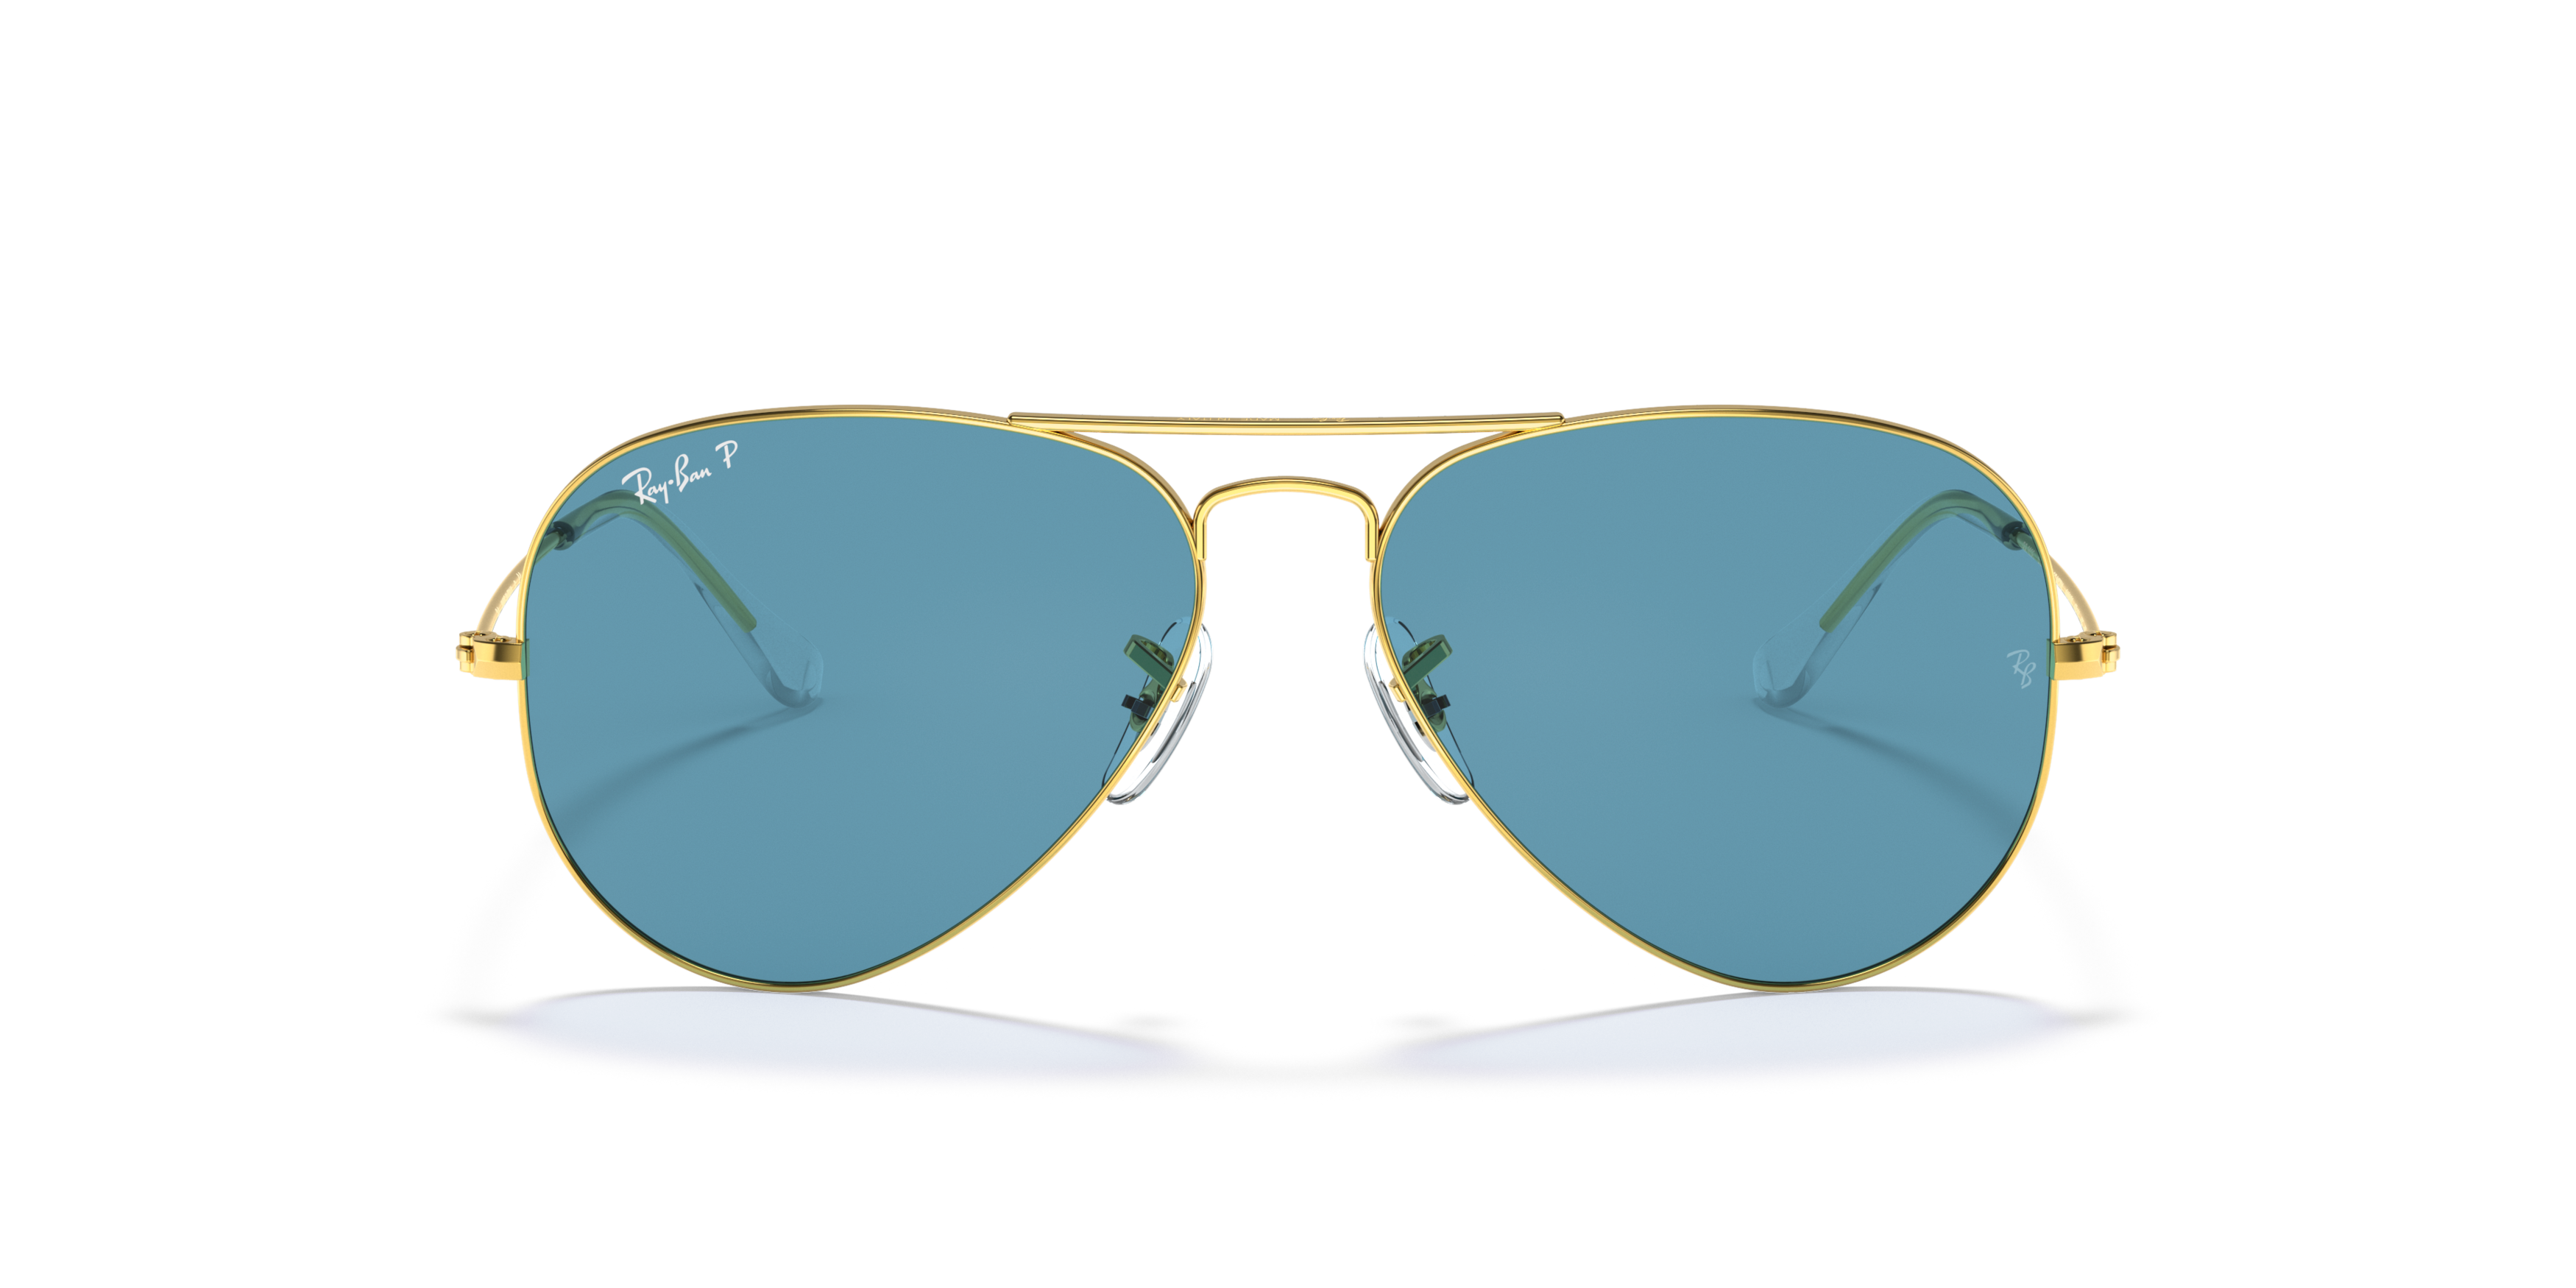 [products.image.front] Ray-Ban Aviator Classic RB3025 9196S2